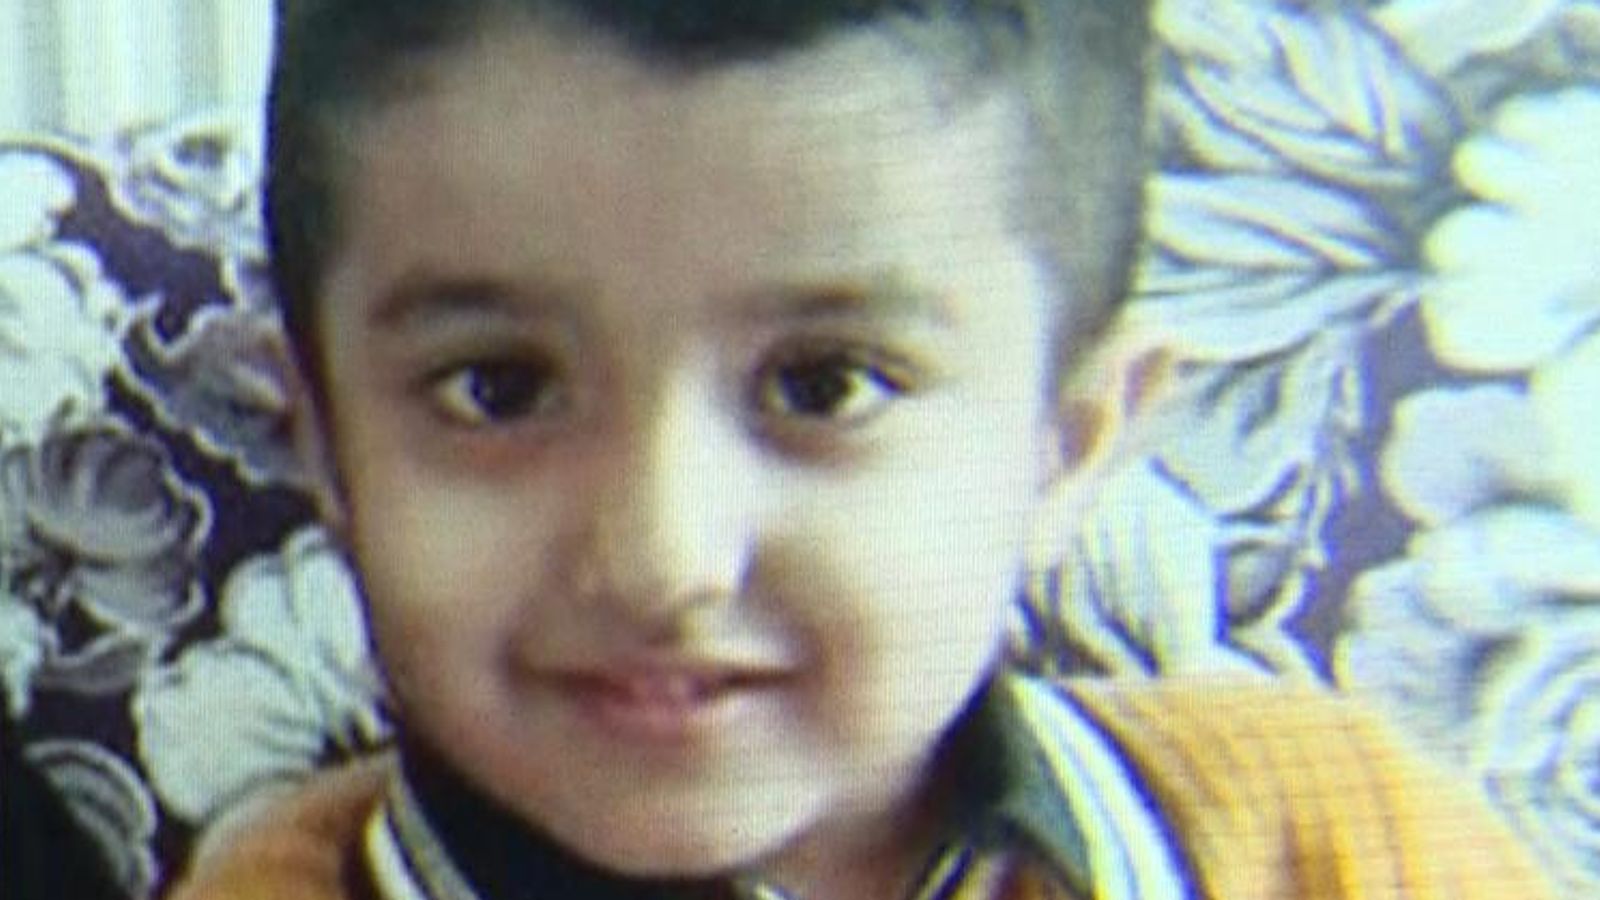 Grieving mother of boy who died after contracting Strep A describes his symptoms